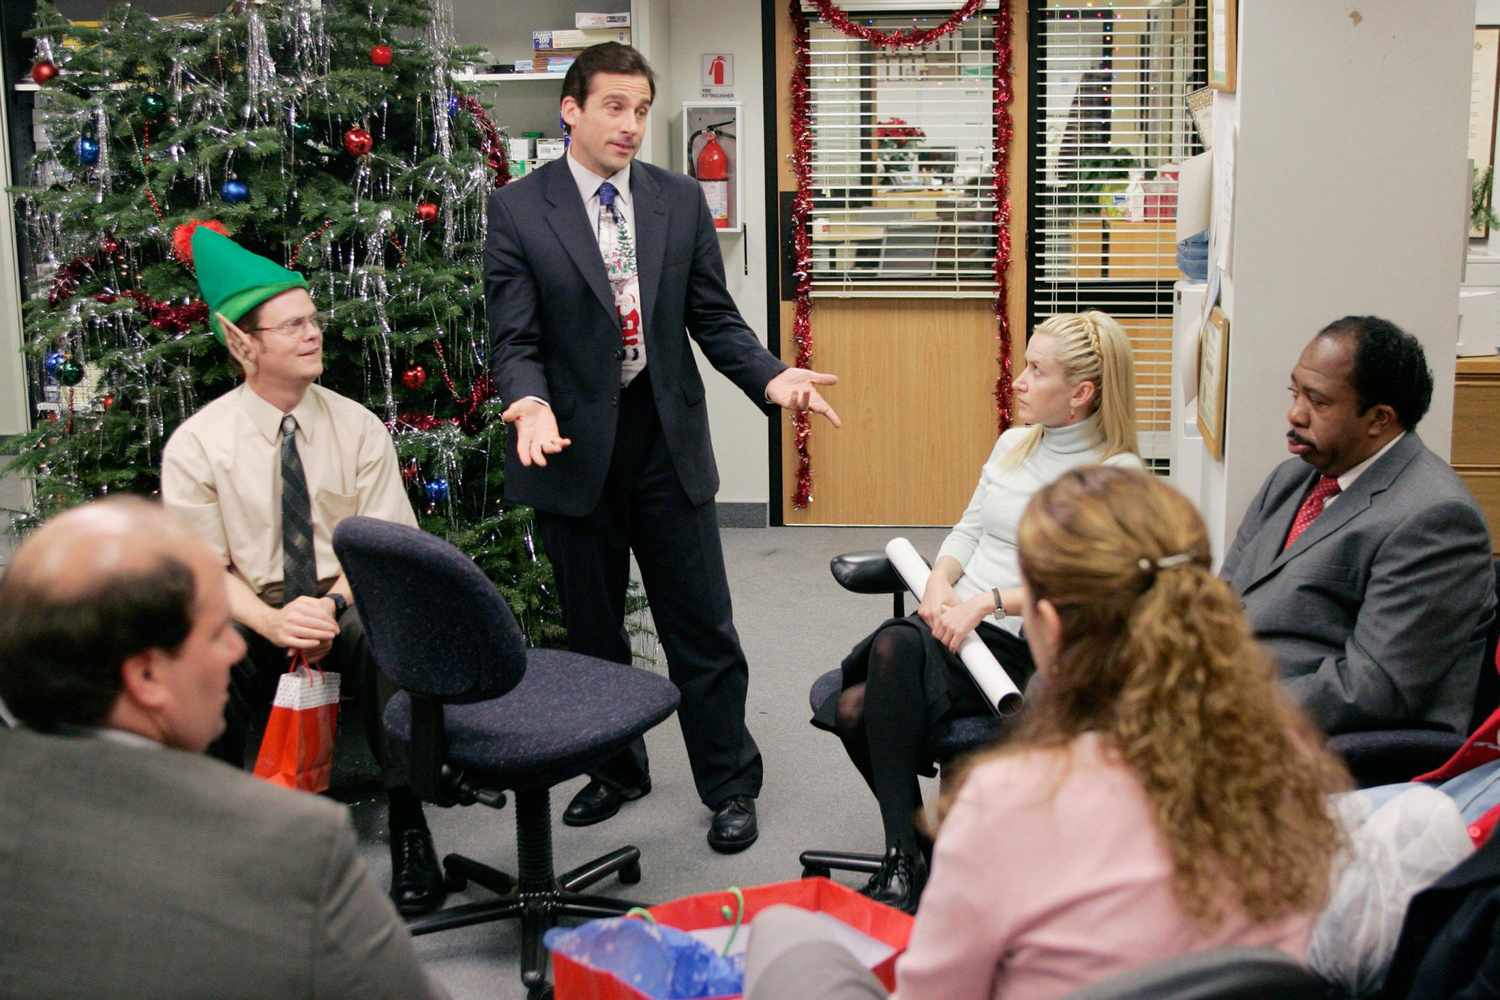 The Office, Christmas Party (season 2, episode 10)